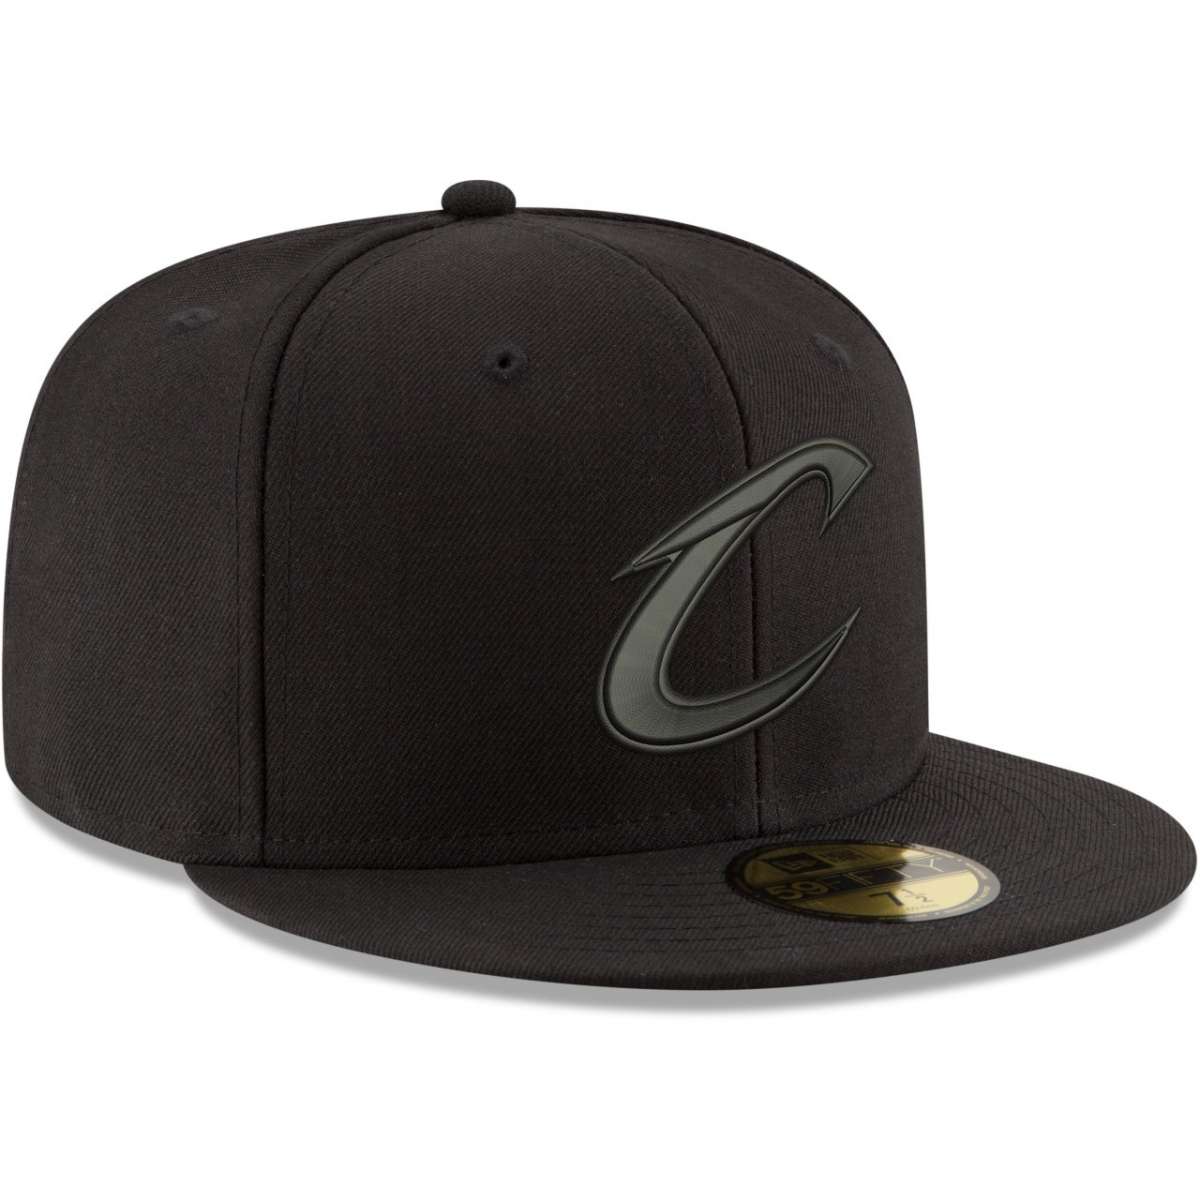 New Era 59Fifty Cap - NBA BLACK Cleveland Cavaliers | Fitted | Caps ...